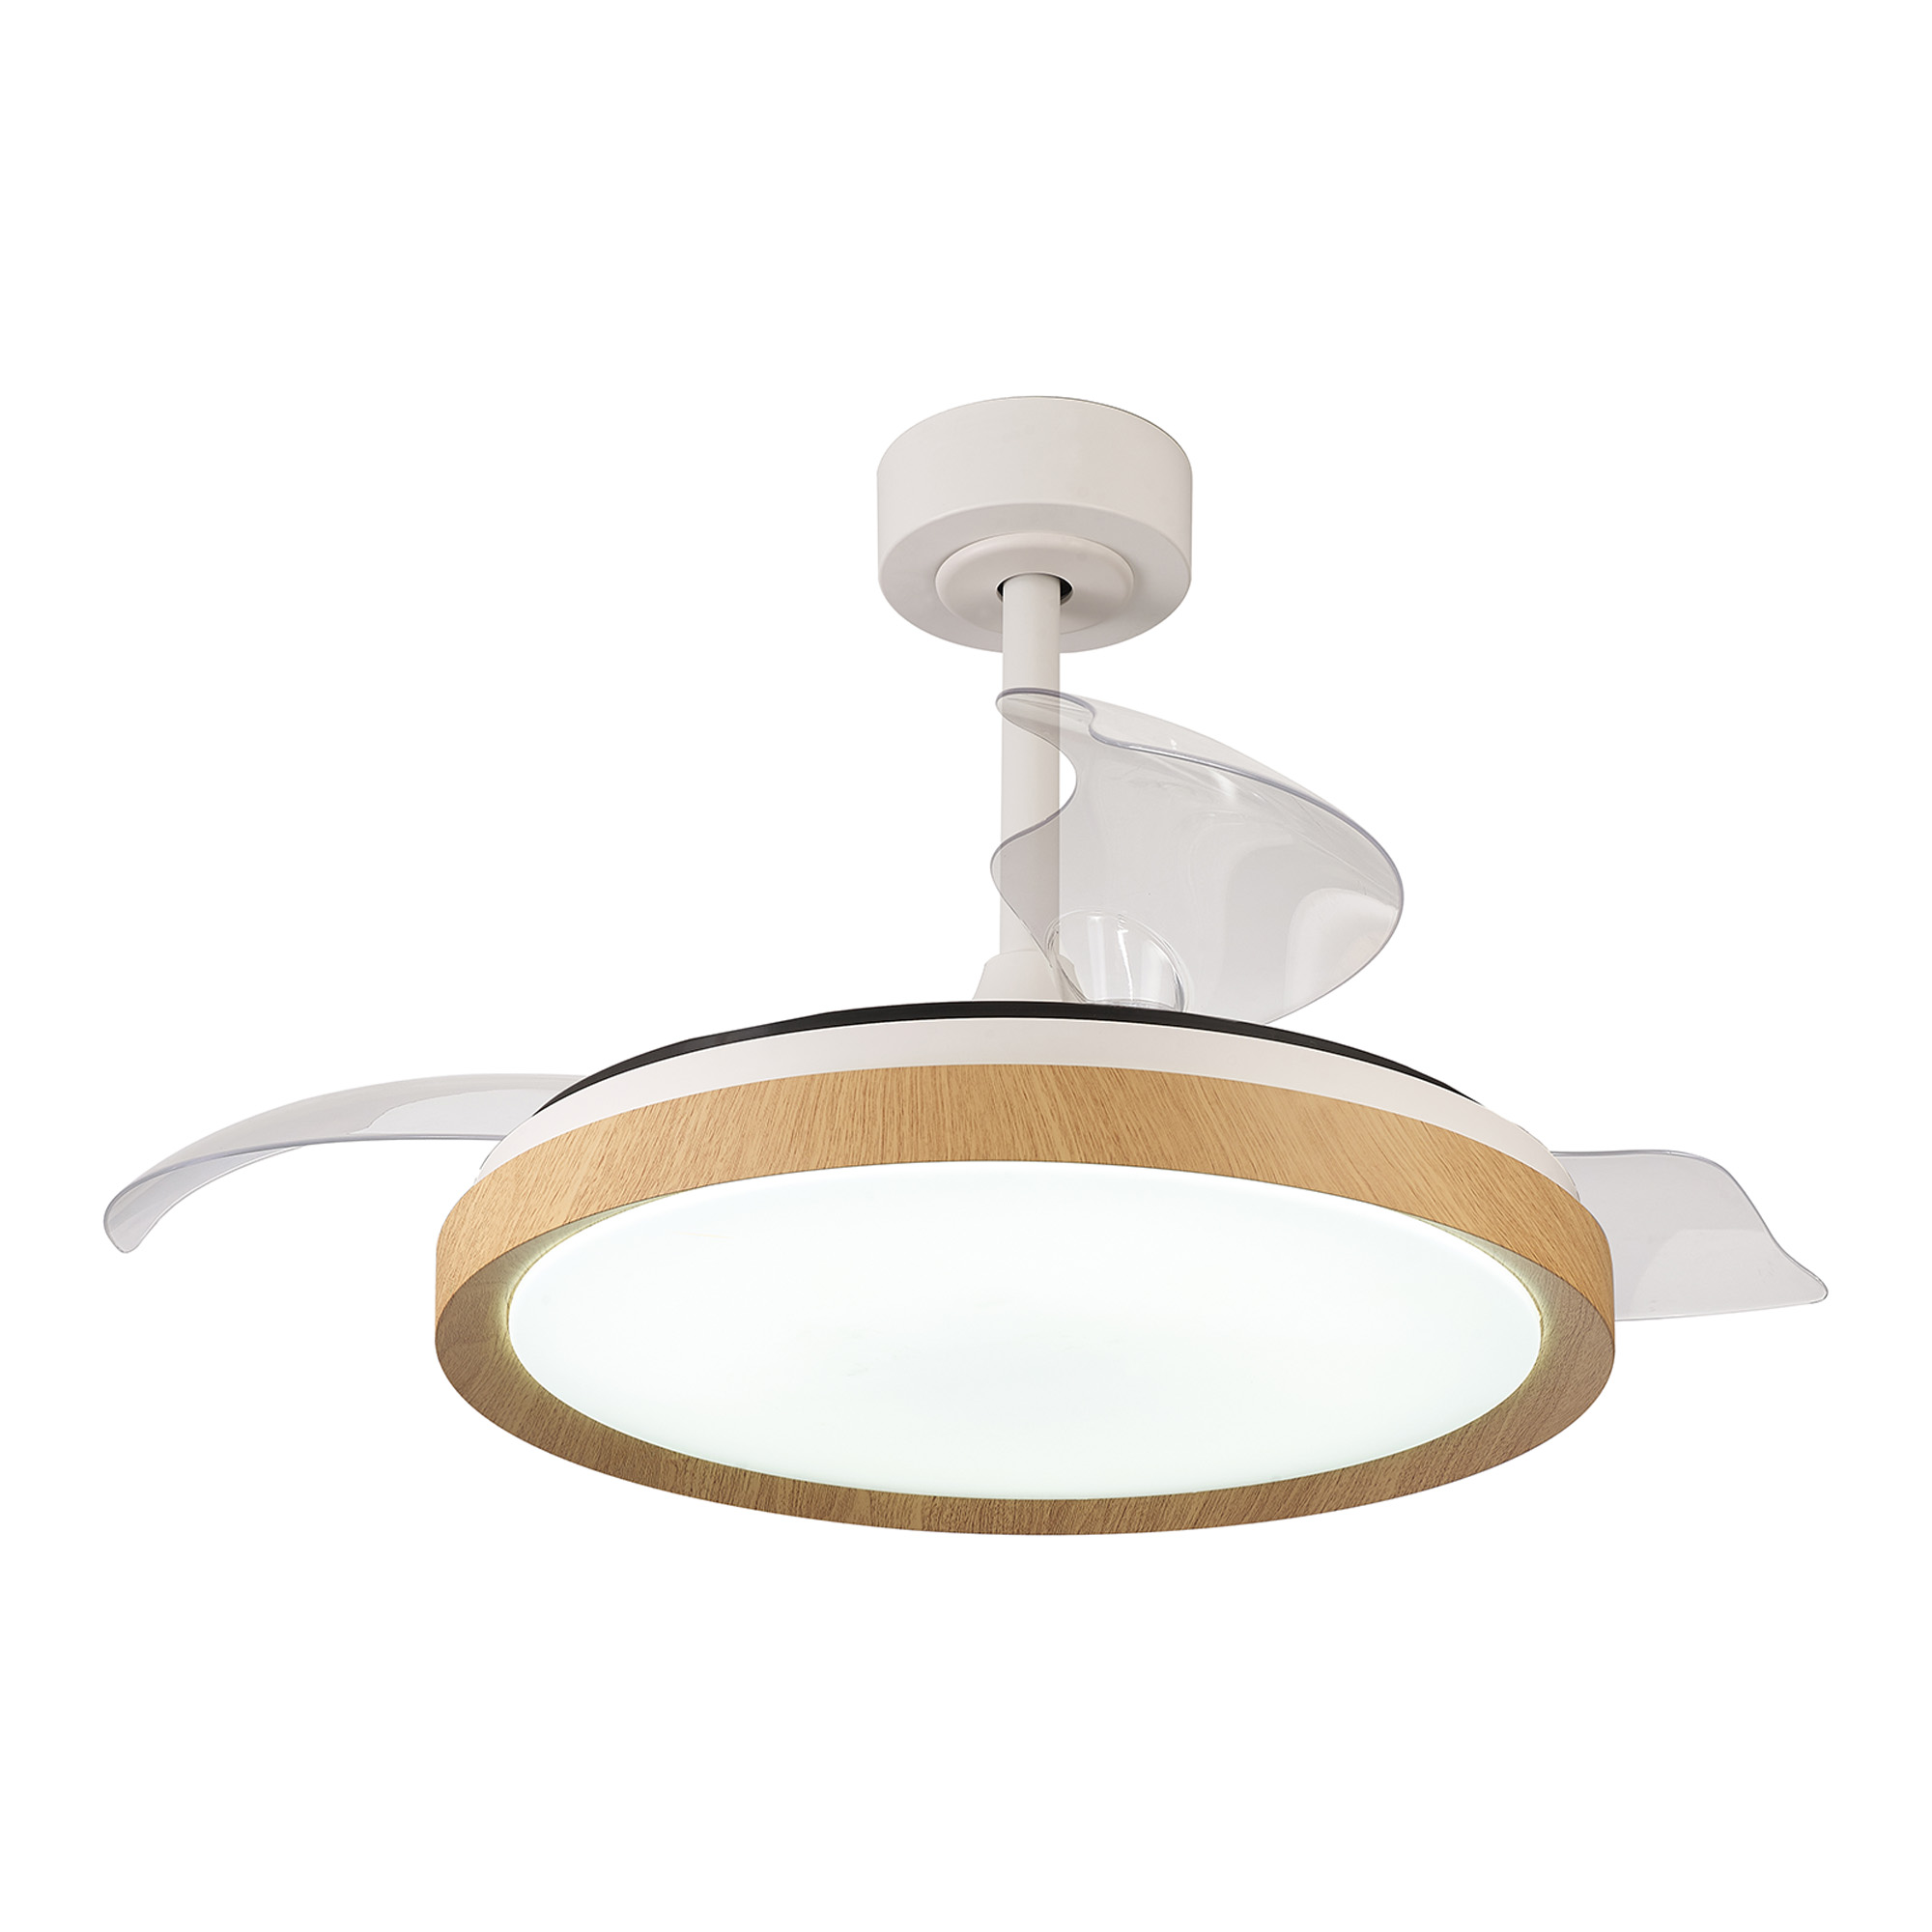 M8827  Mistral 50W LED Dimmable Ceiling Light With Built-In 30W DC Fan, 2700-5000K Remote Control, Wood